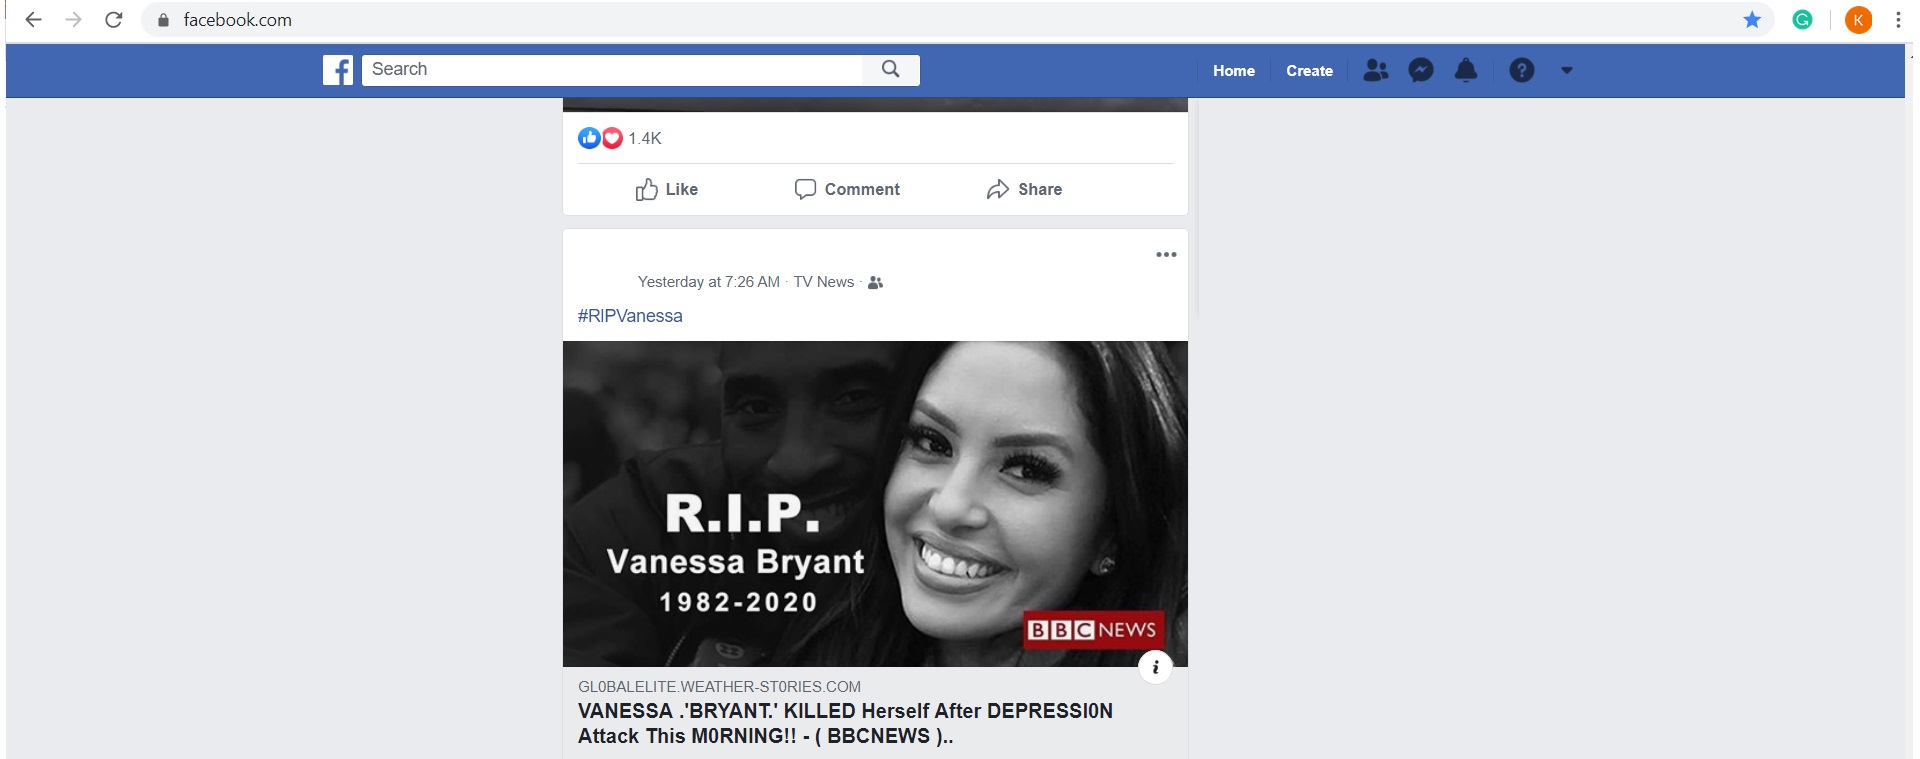 Anessa Bryant Celebrity Death Hoax and Fake-News on Facebook